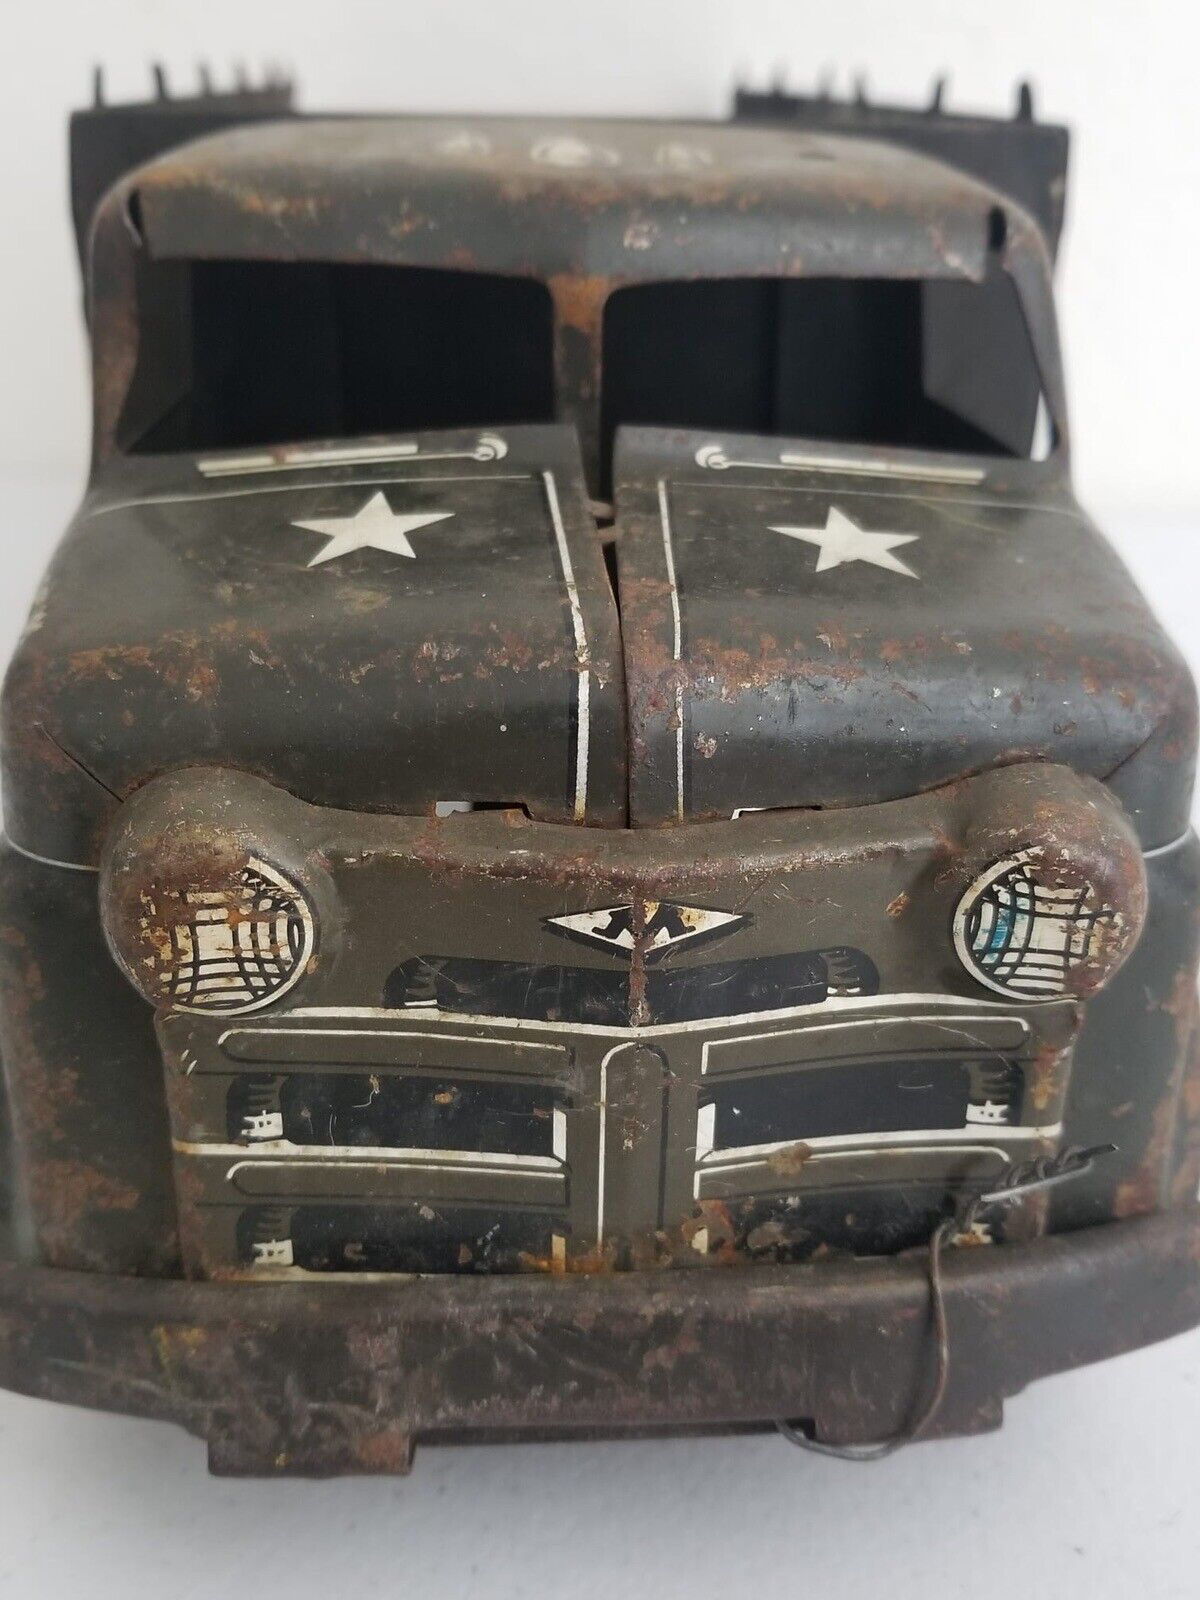 Vintage 1950s LUMAR Military Toy Truck - Pressed Steel Collectible 18.5 Inch - TreasuTiques